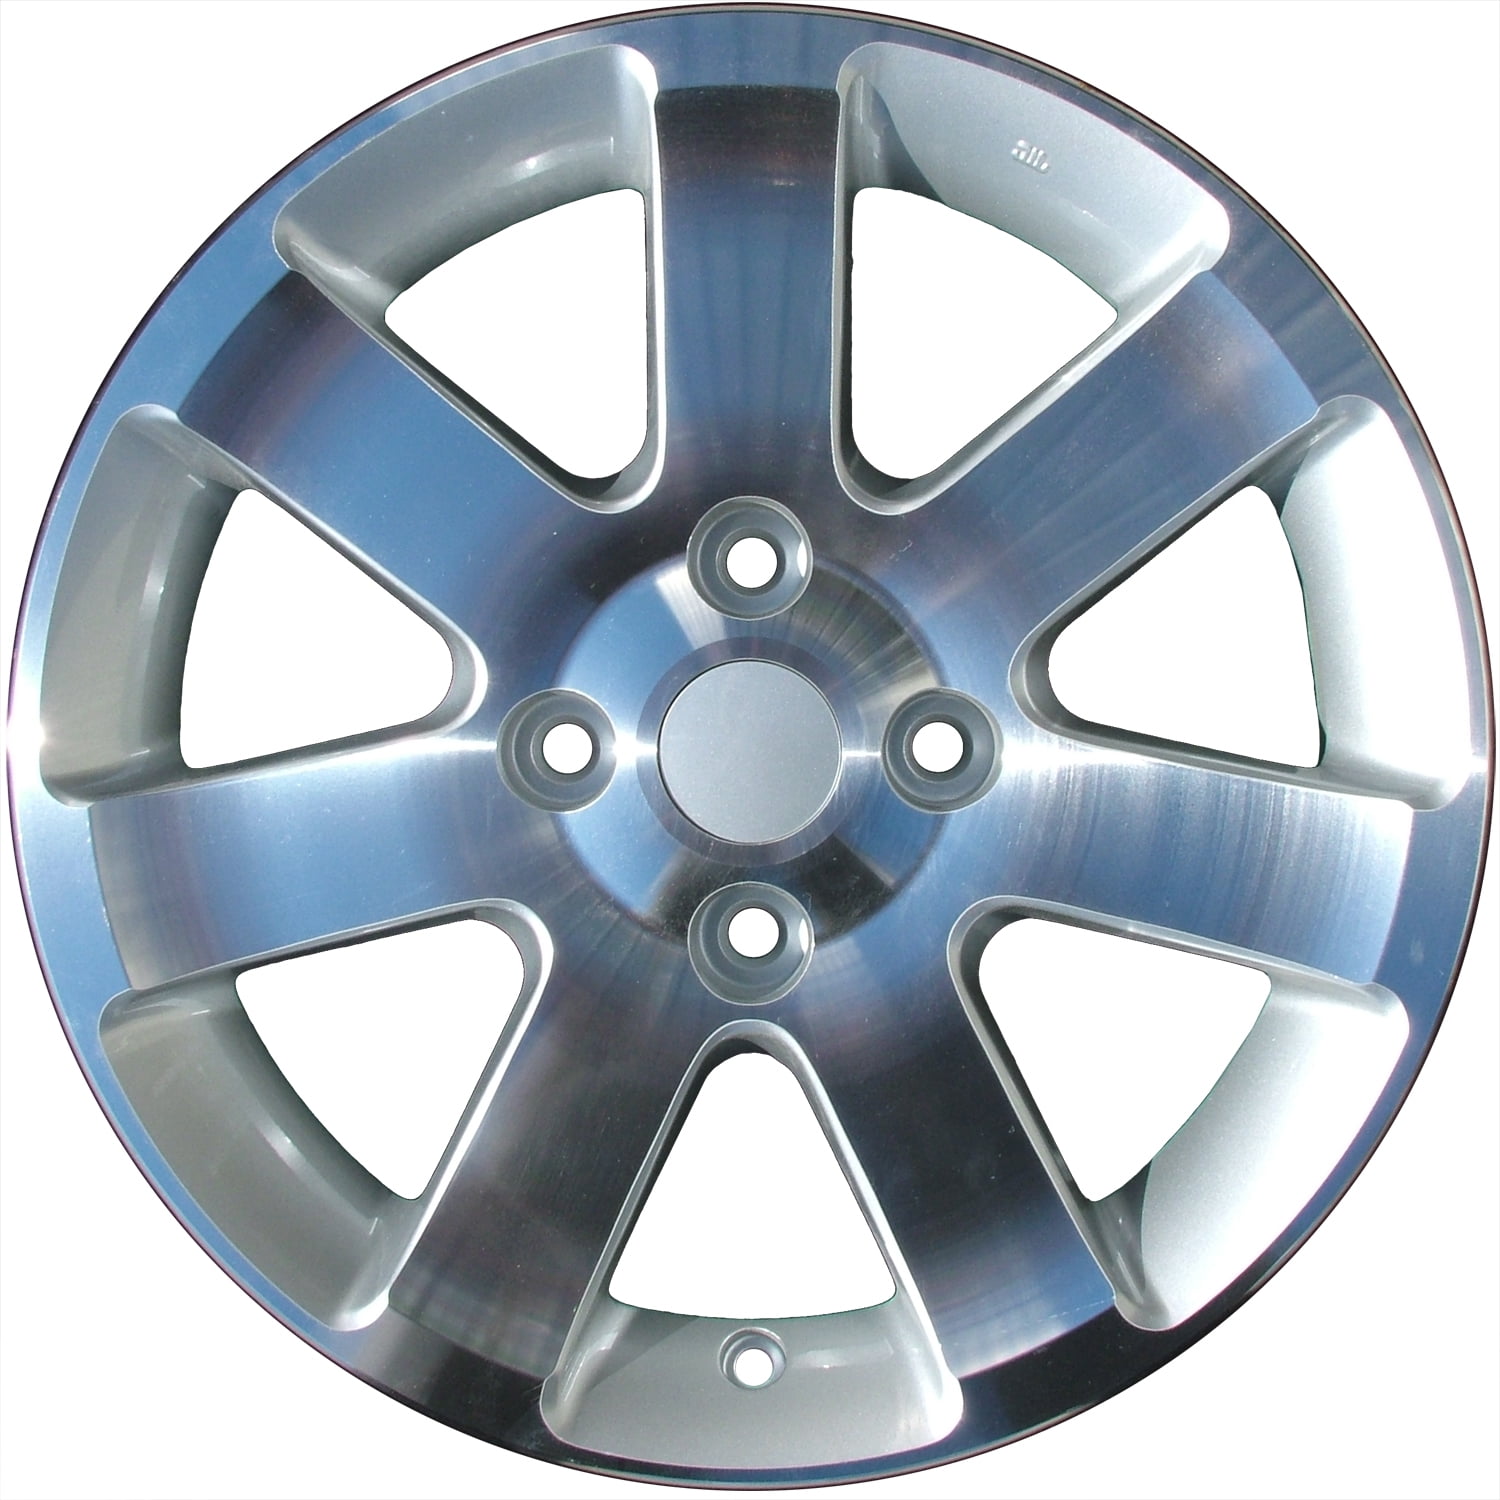 New Set of 4 16" x 6.5" Replacement Steel Wheel Rim for 2007-2012 Nissan Sentra